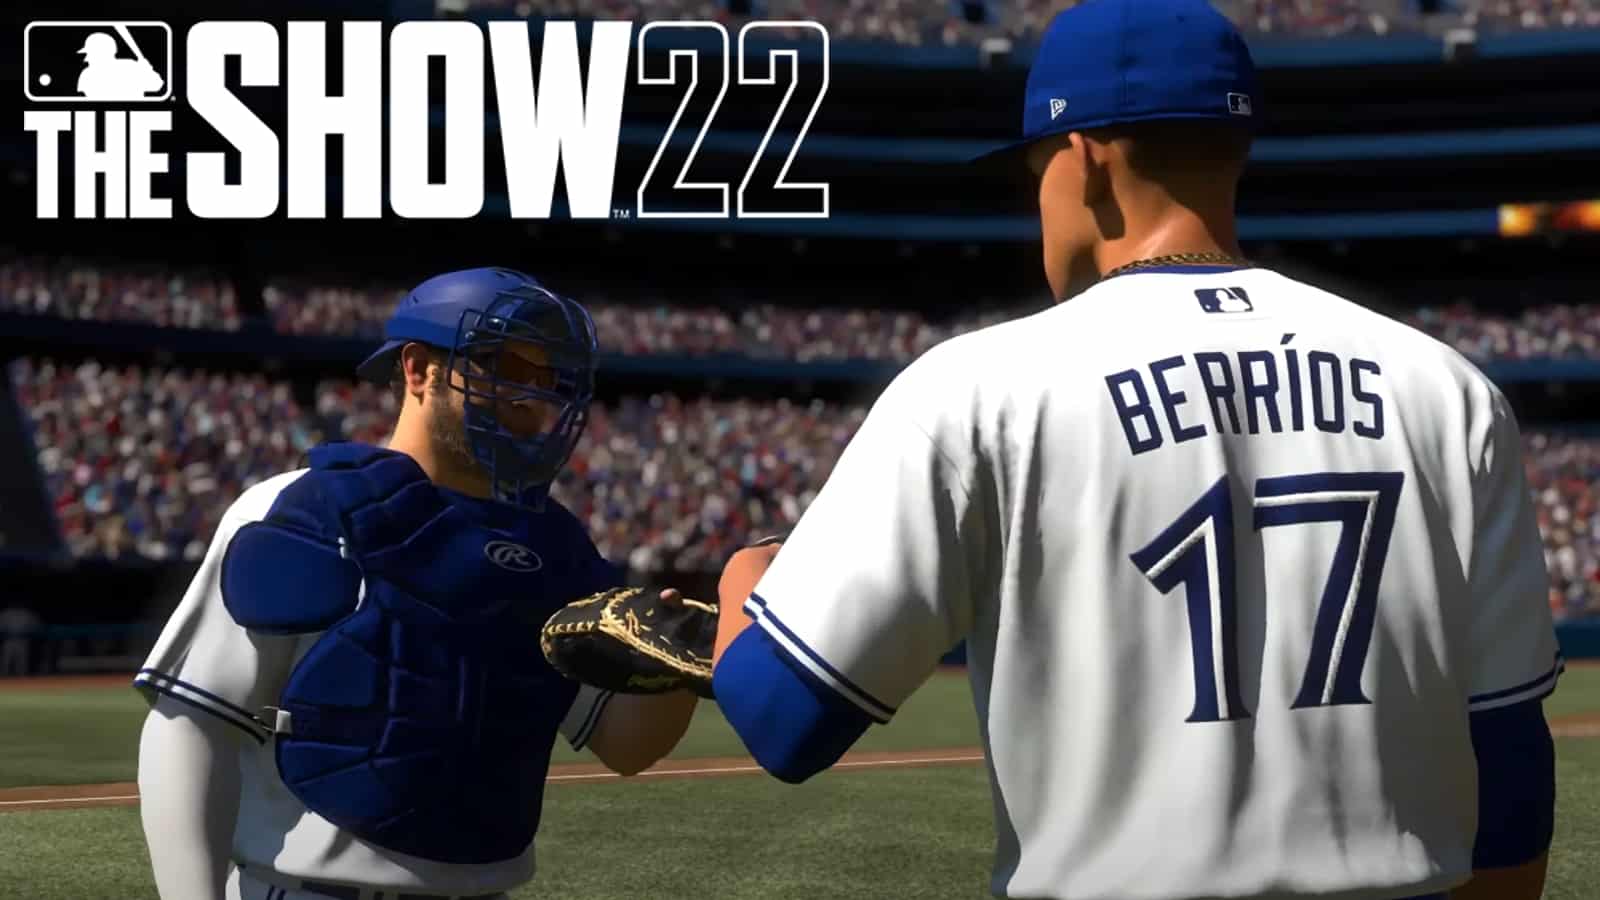 MLB The Show 22 white jersey